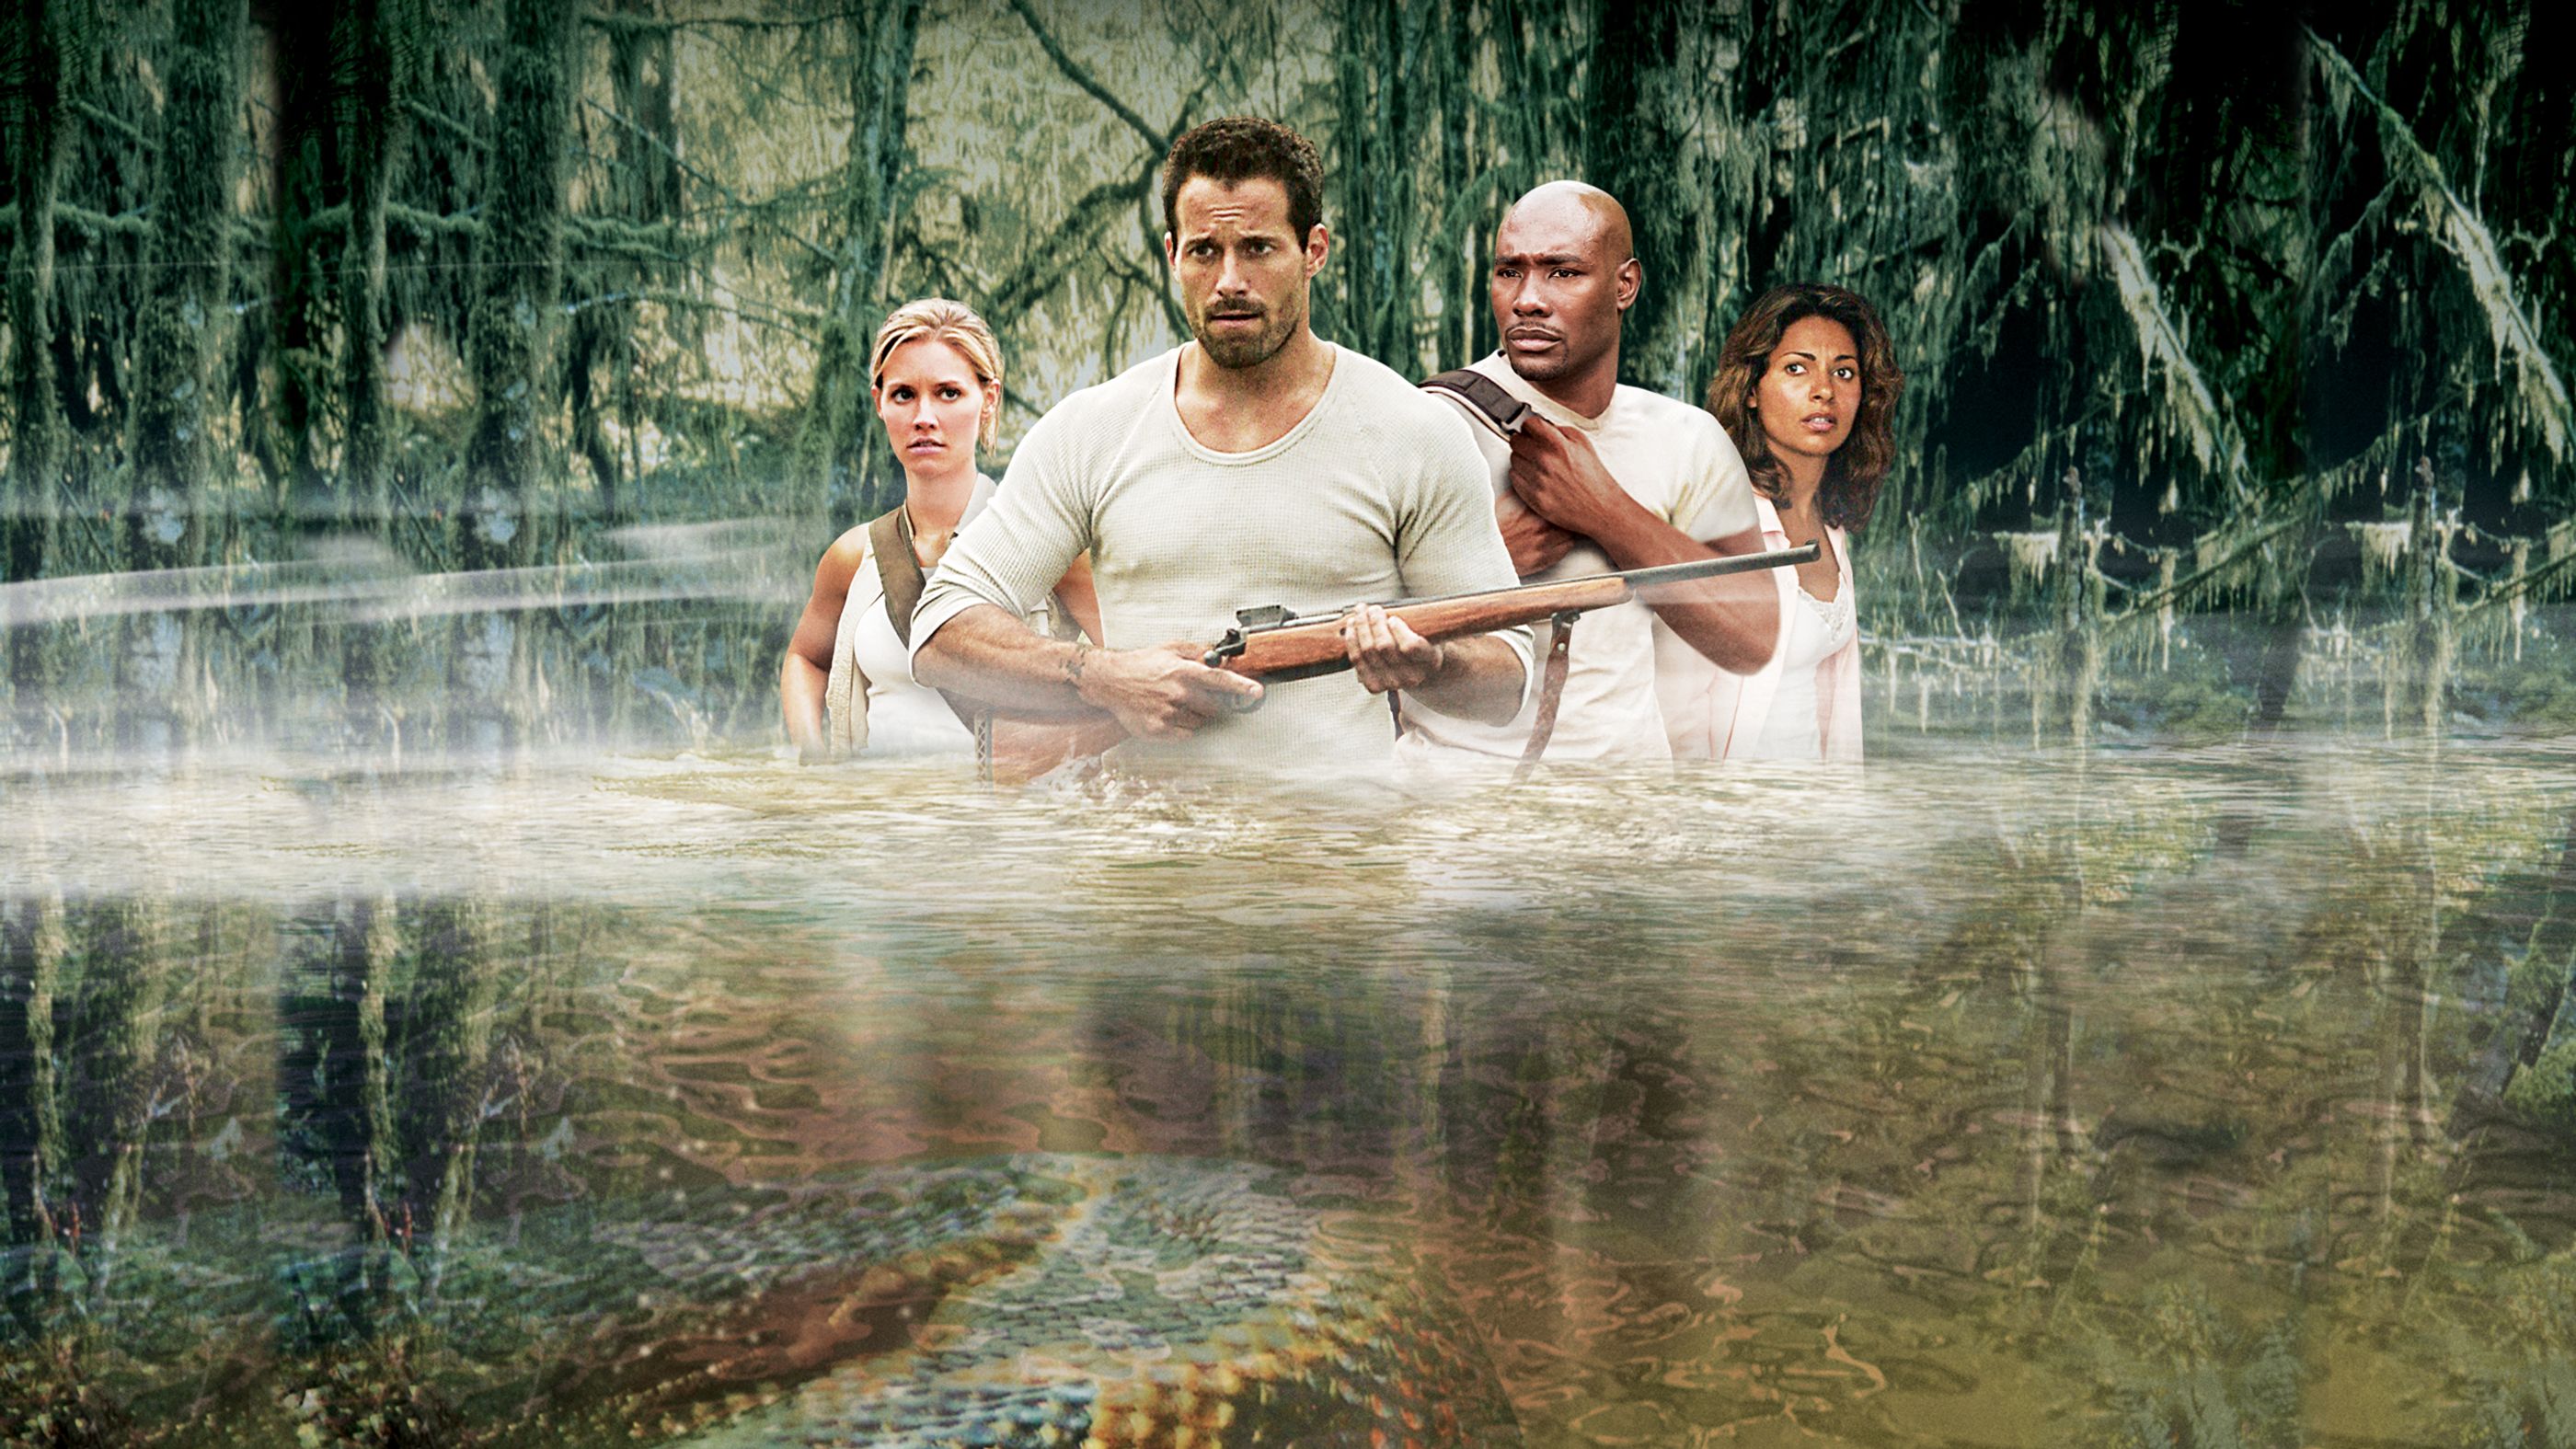 Anacondas The Hunt For The Blood Orchid Full Movie Movies